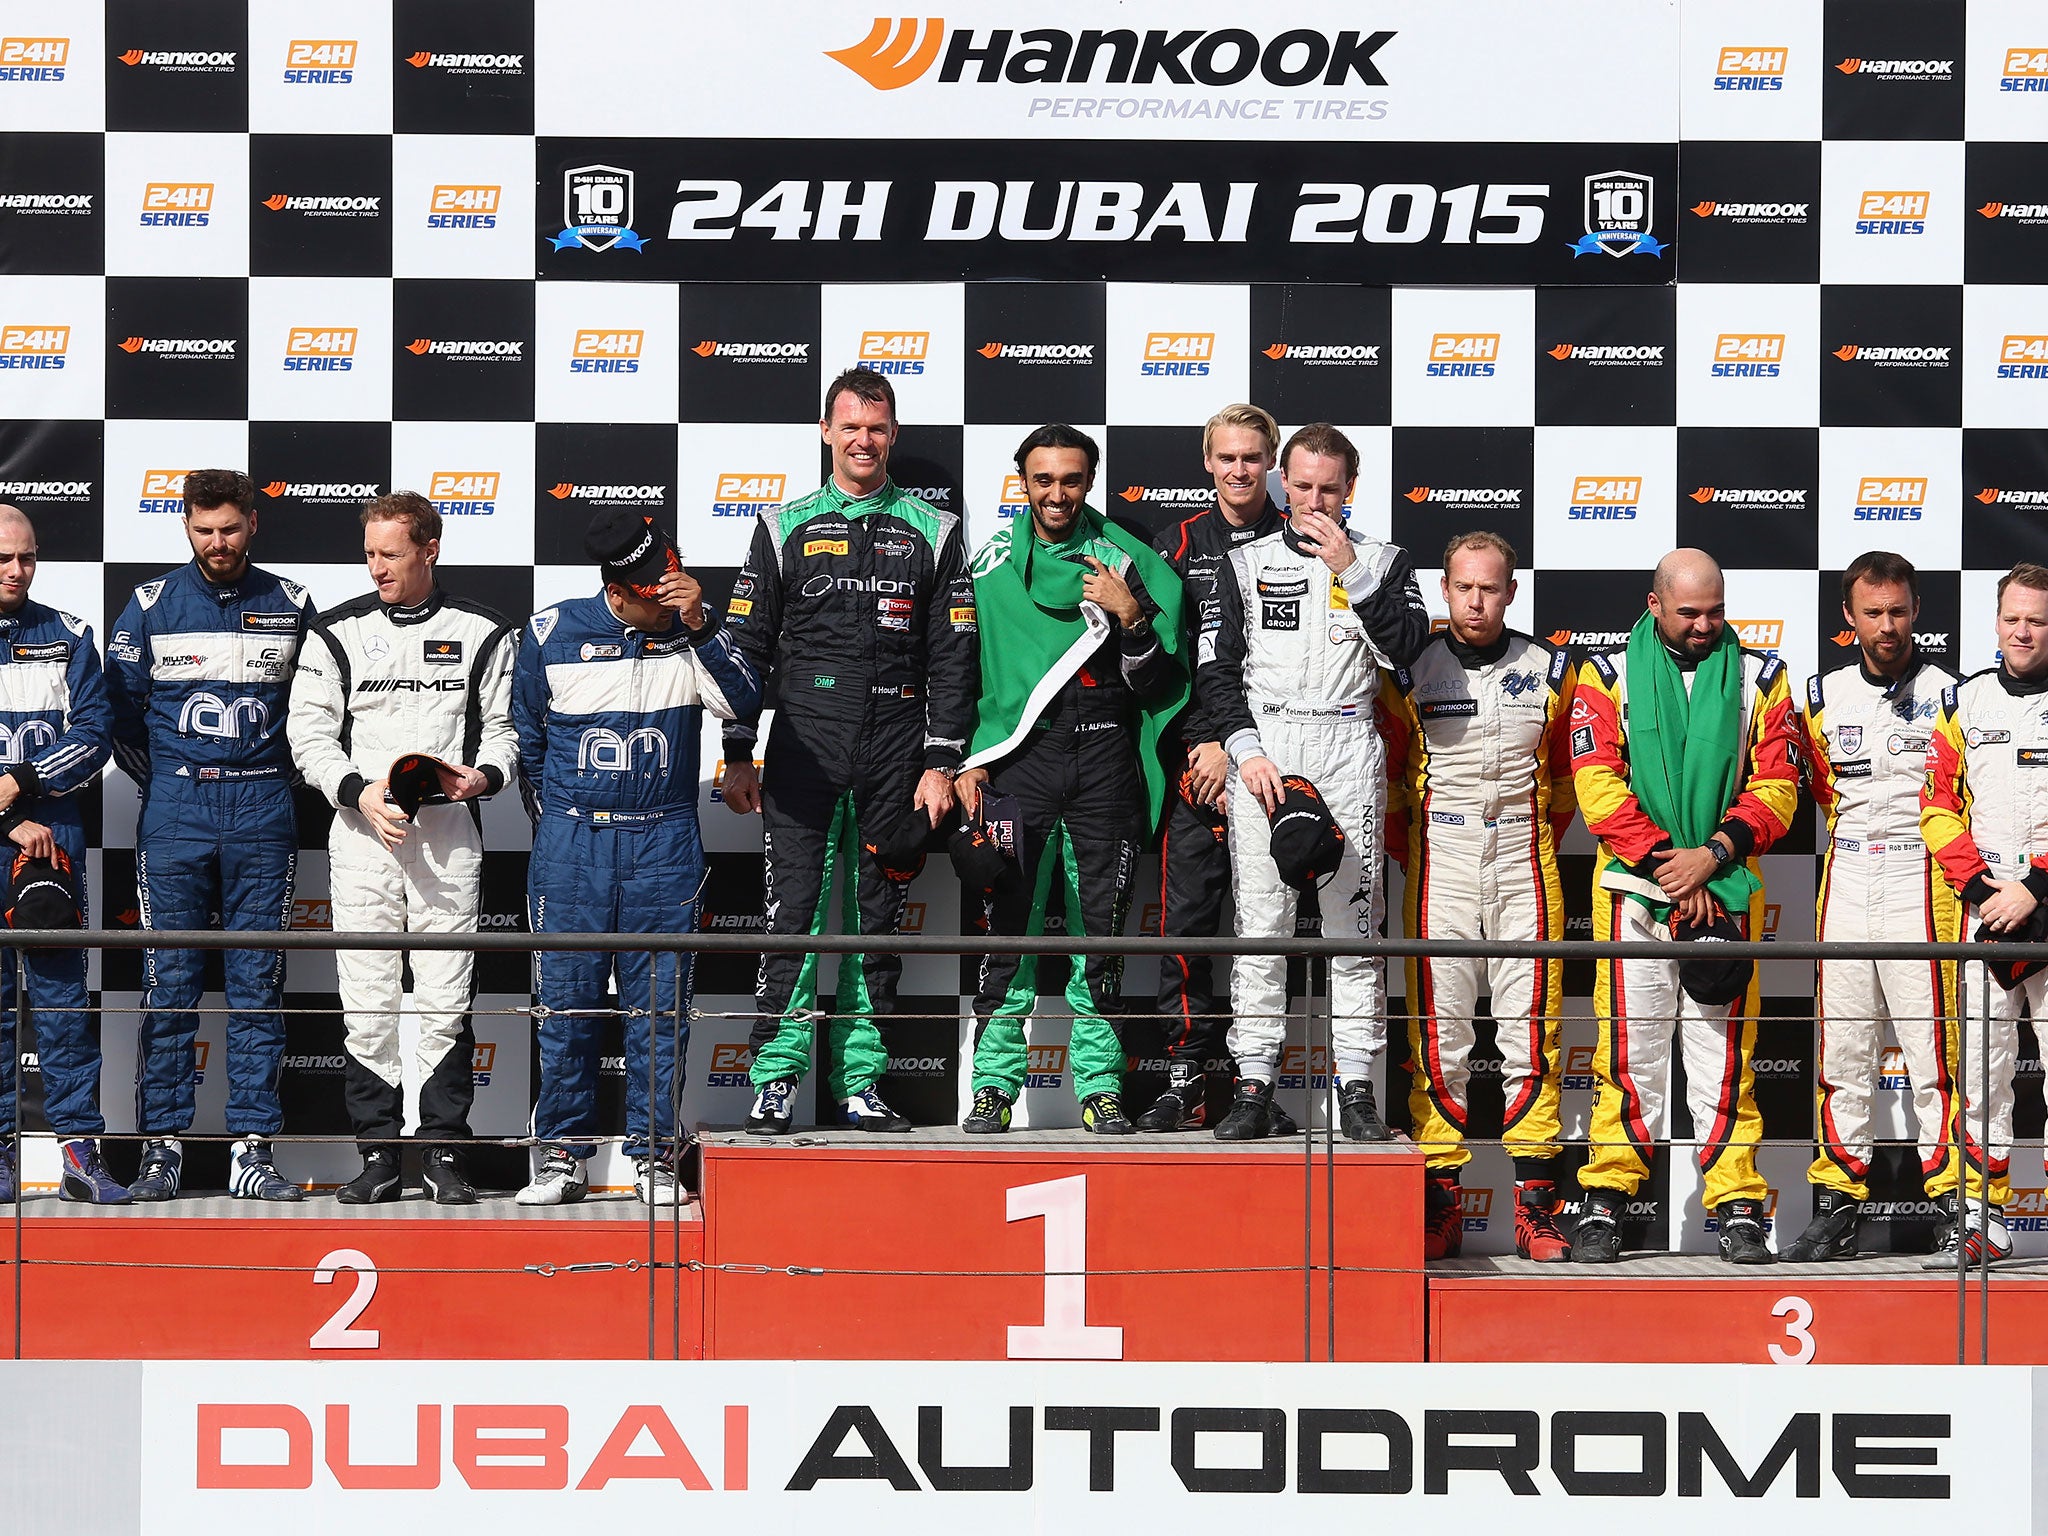 The #2 Black Falcon Mercedes SLS AMG GT3 team of Abdulaziz Al Faisal of Saudi Arabia, Hubert Haupt of Germany, Yelmer Buurman of the Netherlands and Oliver Webb of England celebrate on the podium after finishing first during the Hankook 24 Hours Dubai Ra